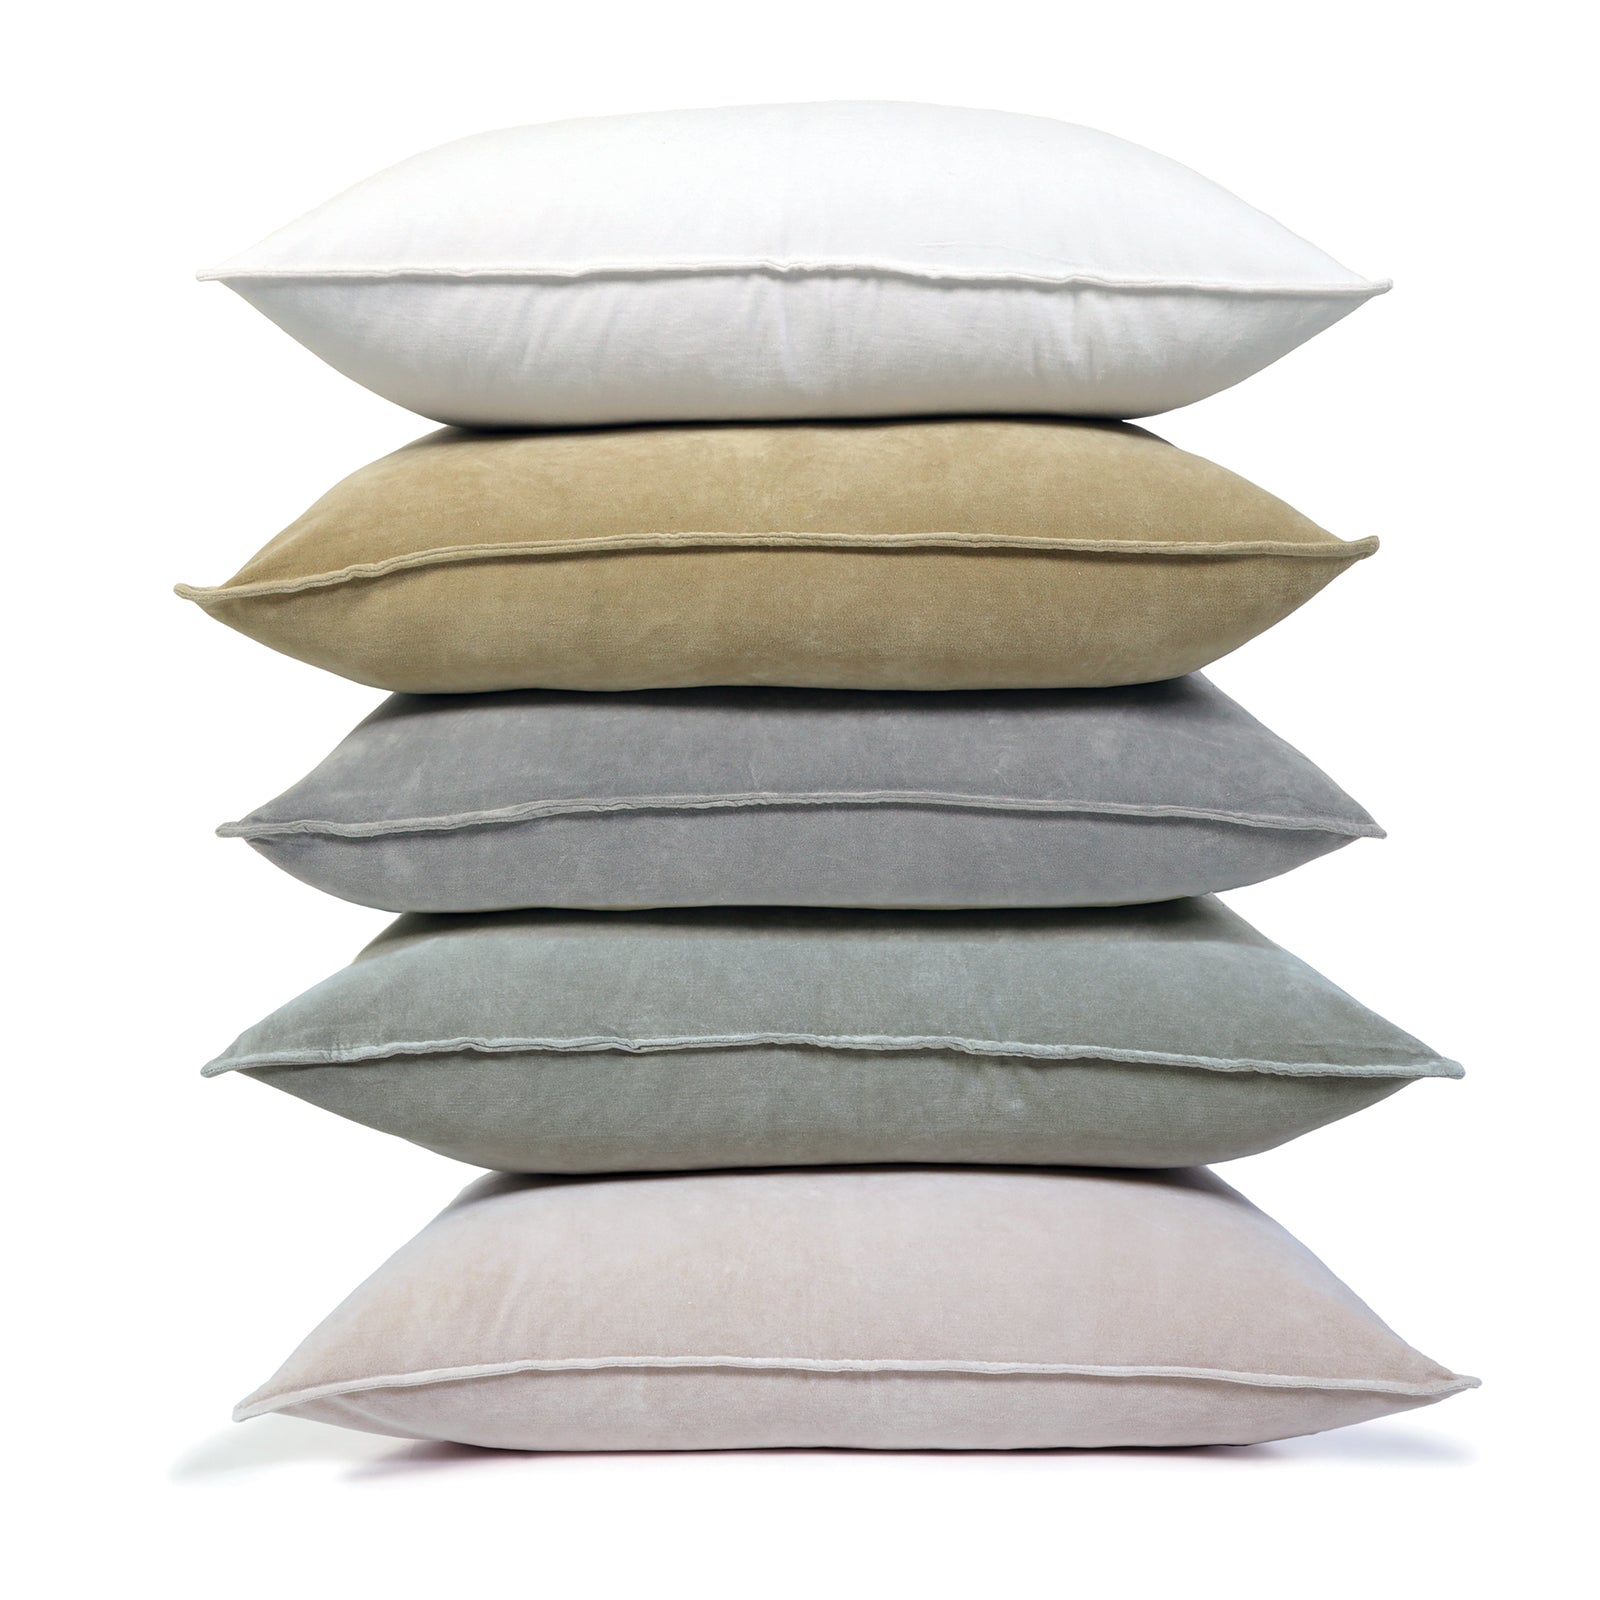 Bianca BIG PILLOW 28" X 36" WITH INSERT - 5 colors